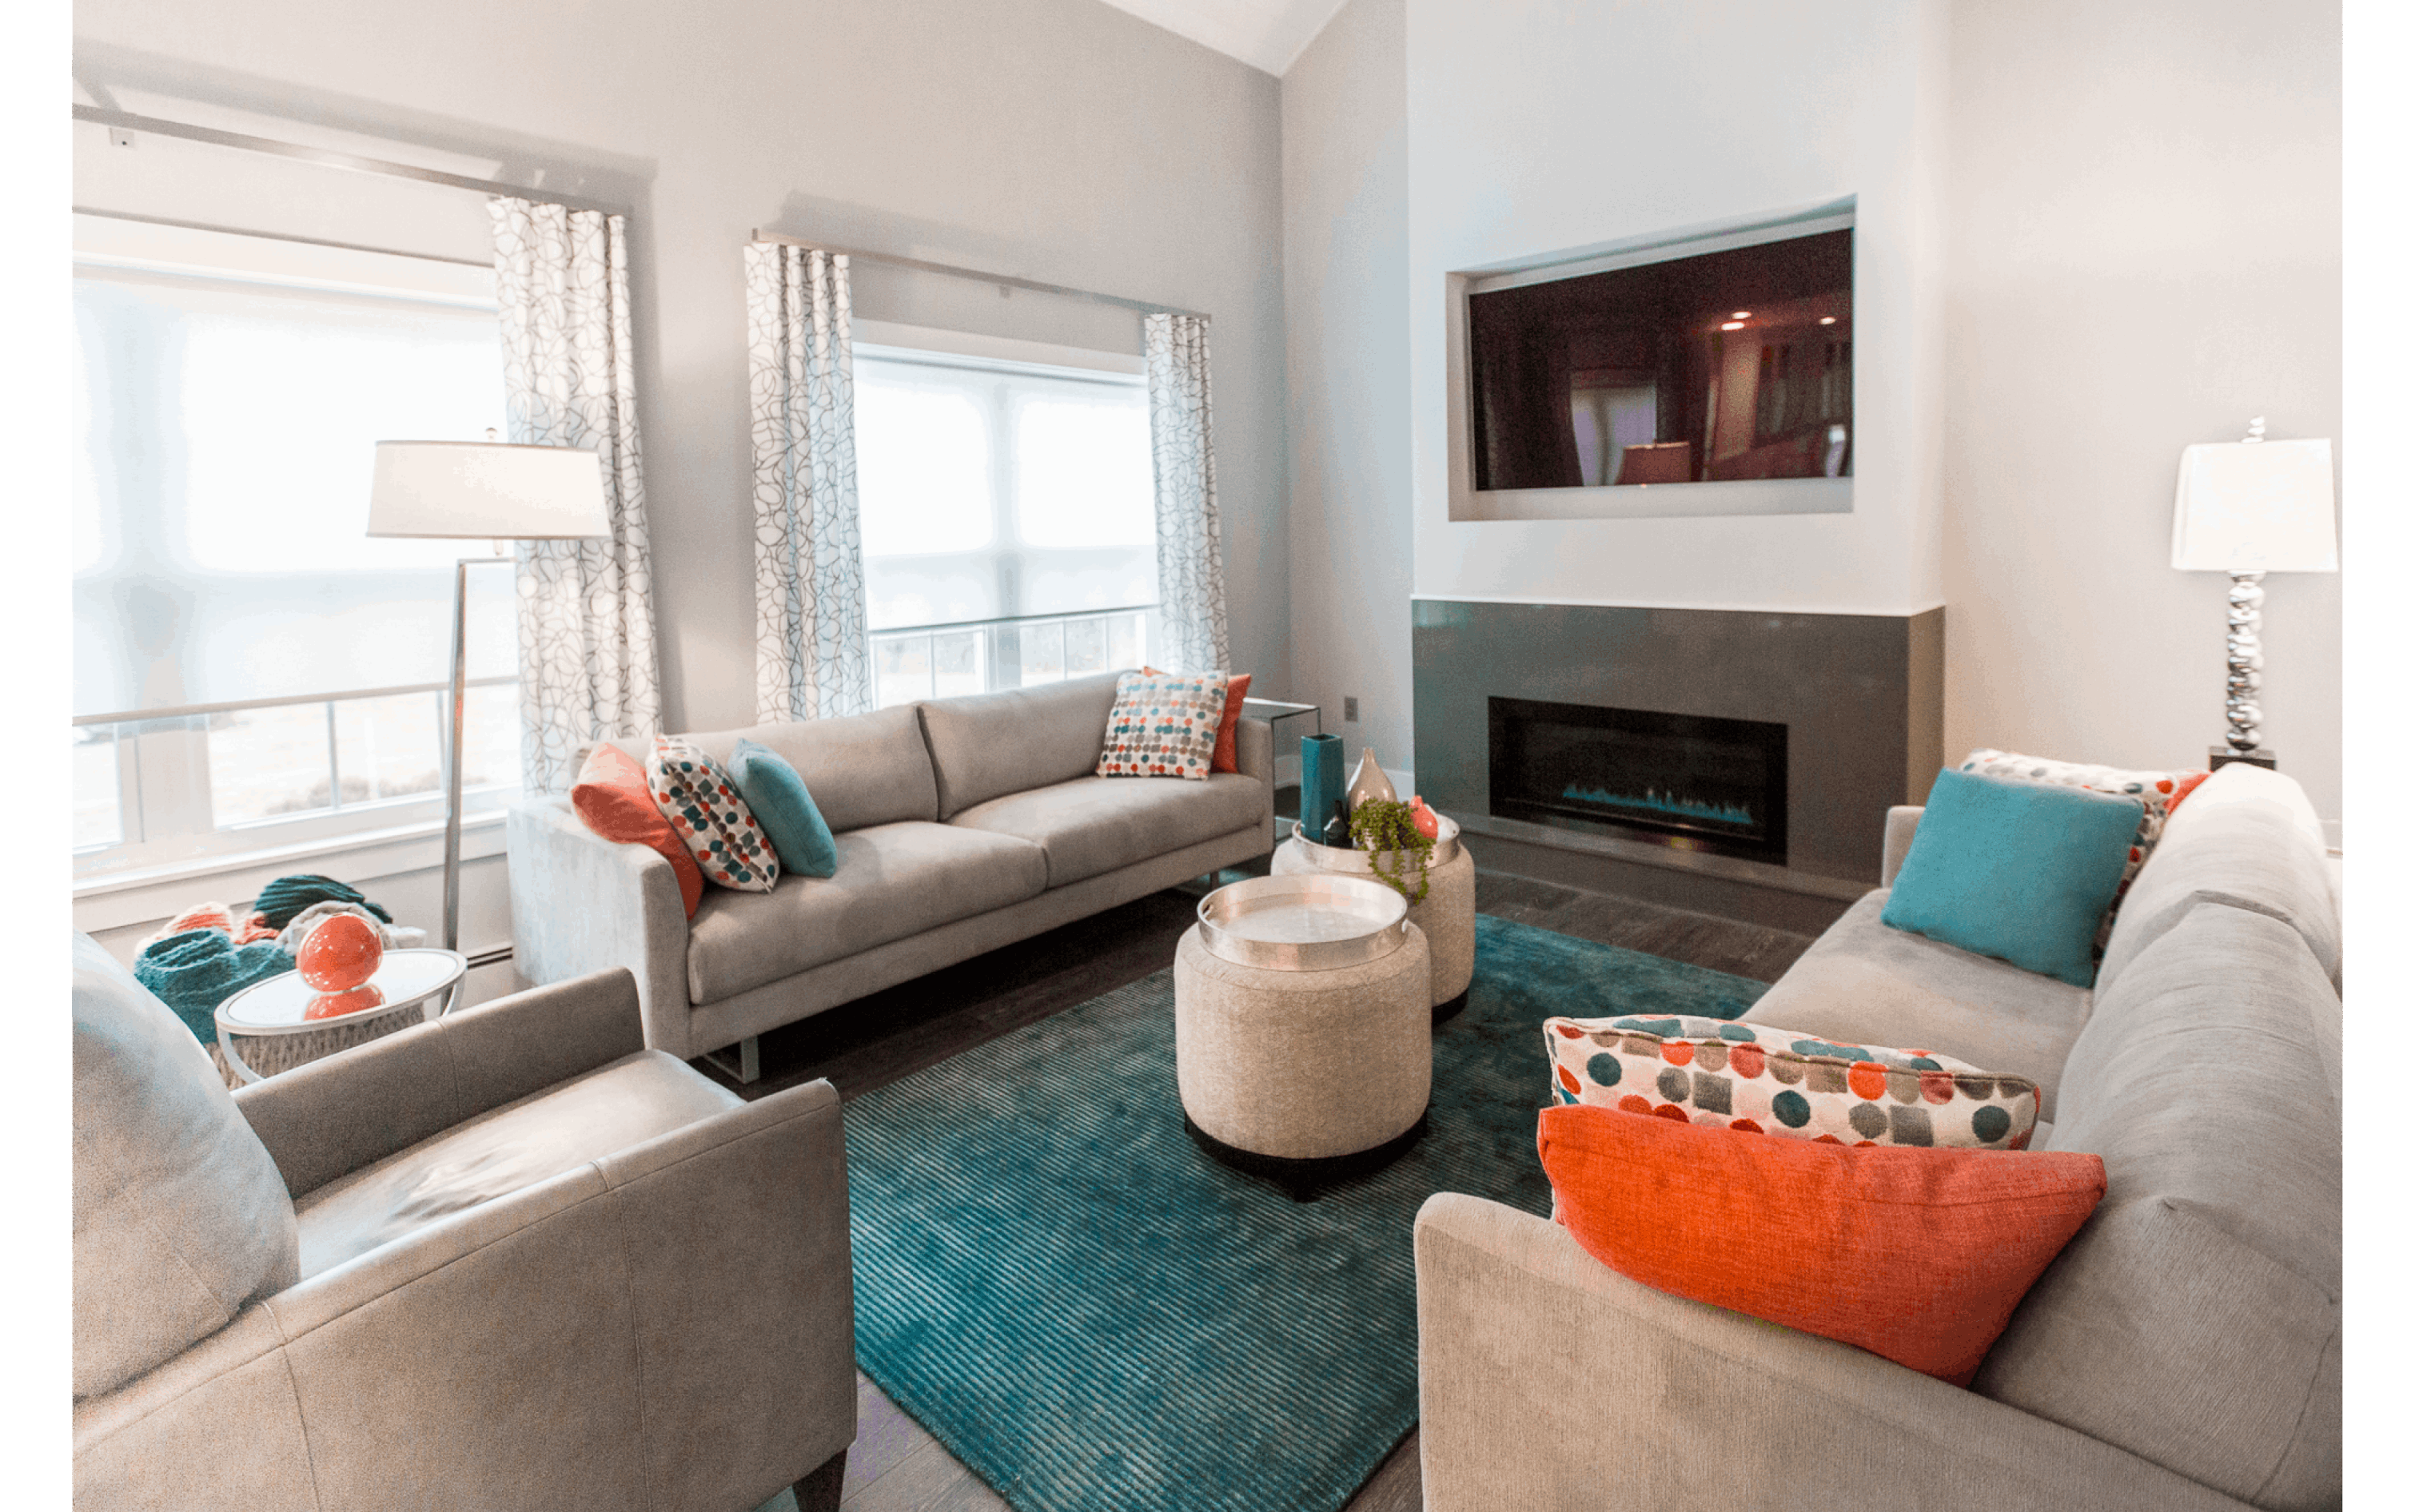 Large bright family room with two large picture windows and modern grey fireplace